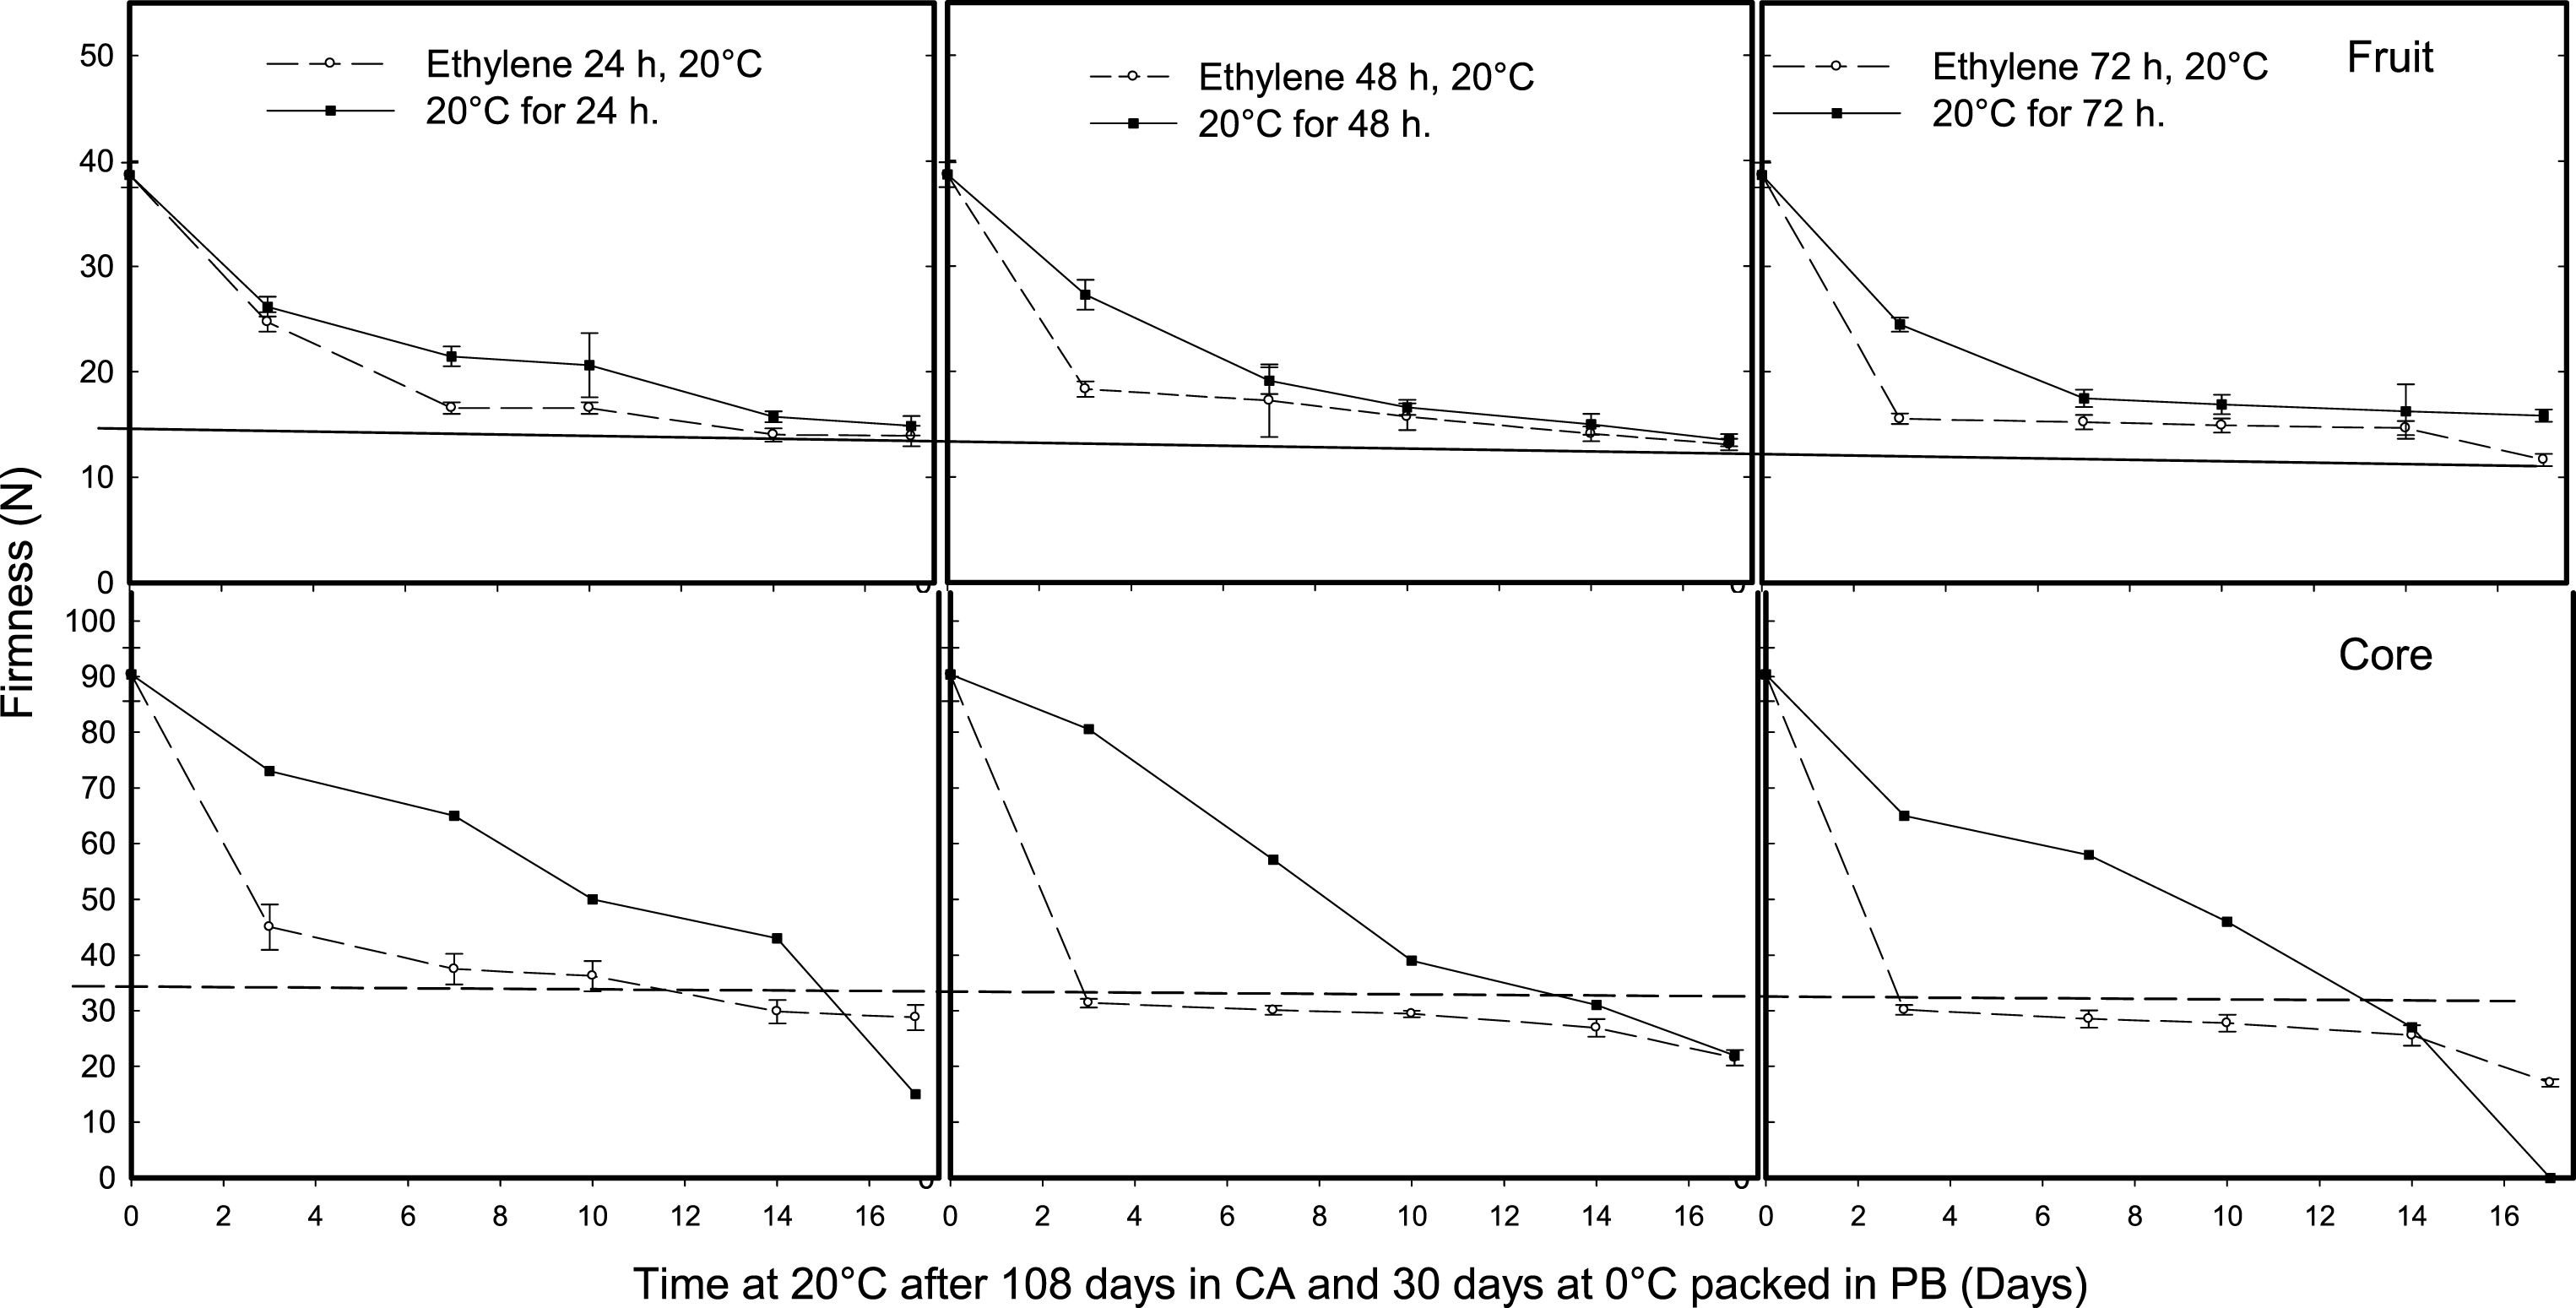 Effect of ethylene (100 μl l–1) application time (24, 48, 72 h) at a temperature of 20°C on kiwifruit tissue softening (whole fruit and core) during ripening at 20°C after 108 days storage in a controlled atmosphere (CA, 2% O2 and 5% CO2) and packed in perforated bags (PB) at 0°C for 30 days. The ethylene was applied after the fruit was removed from CA and further 30 days at 0°C and compared with fruit no- treated with ethylene and pre-ripened at 20°C for 24, 48 or 72 h. The solid and dotted horizontal lines indicate the ready to eat firmness value (<13 N) and soft core firmness perception (<35.5 N) receptively.